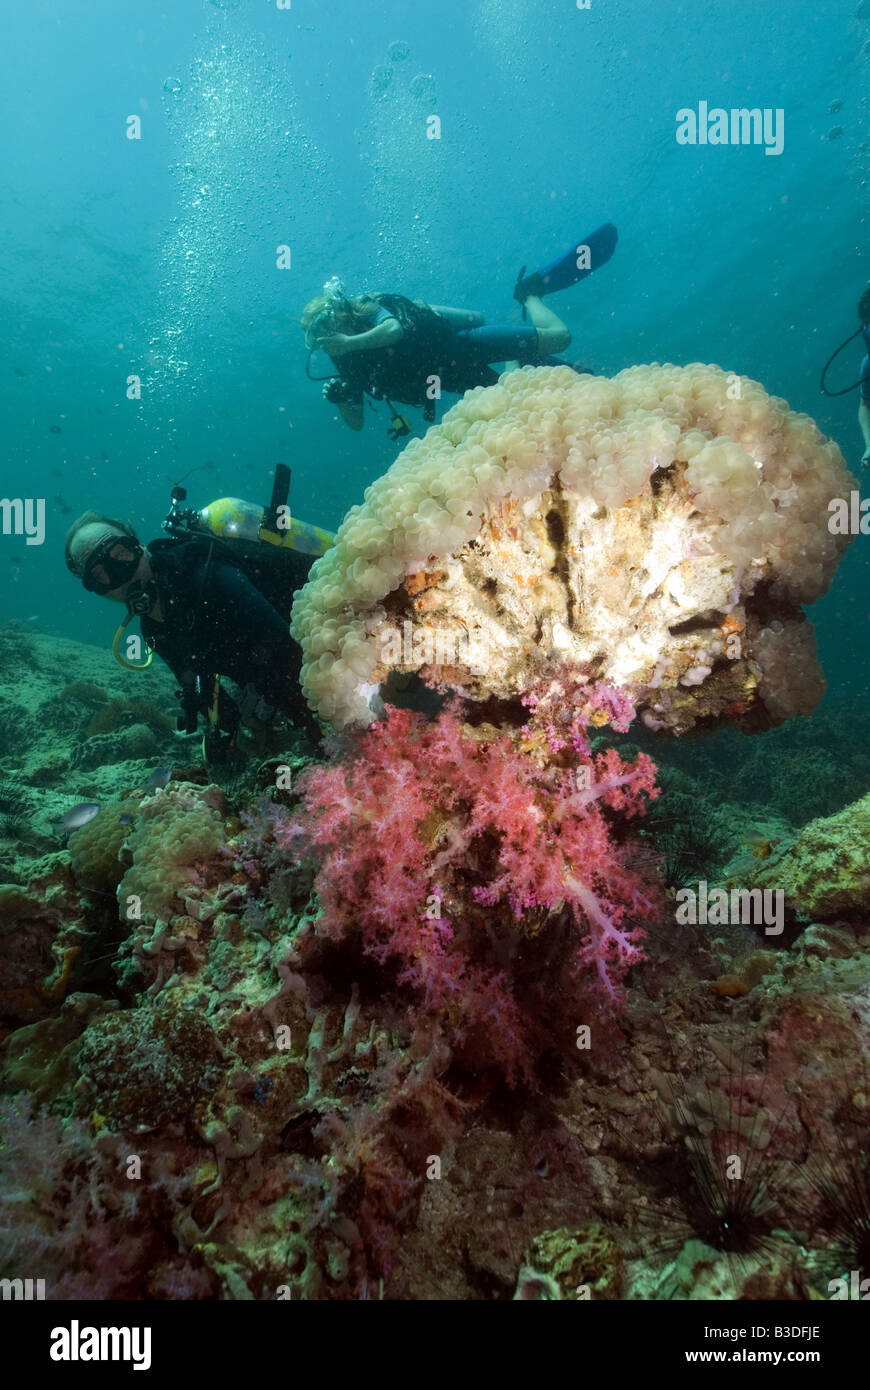 Young girl student and diving instructor diving over coral reef under water Stock Photo